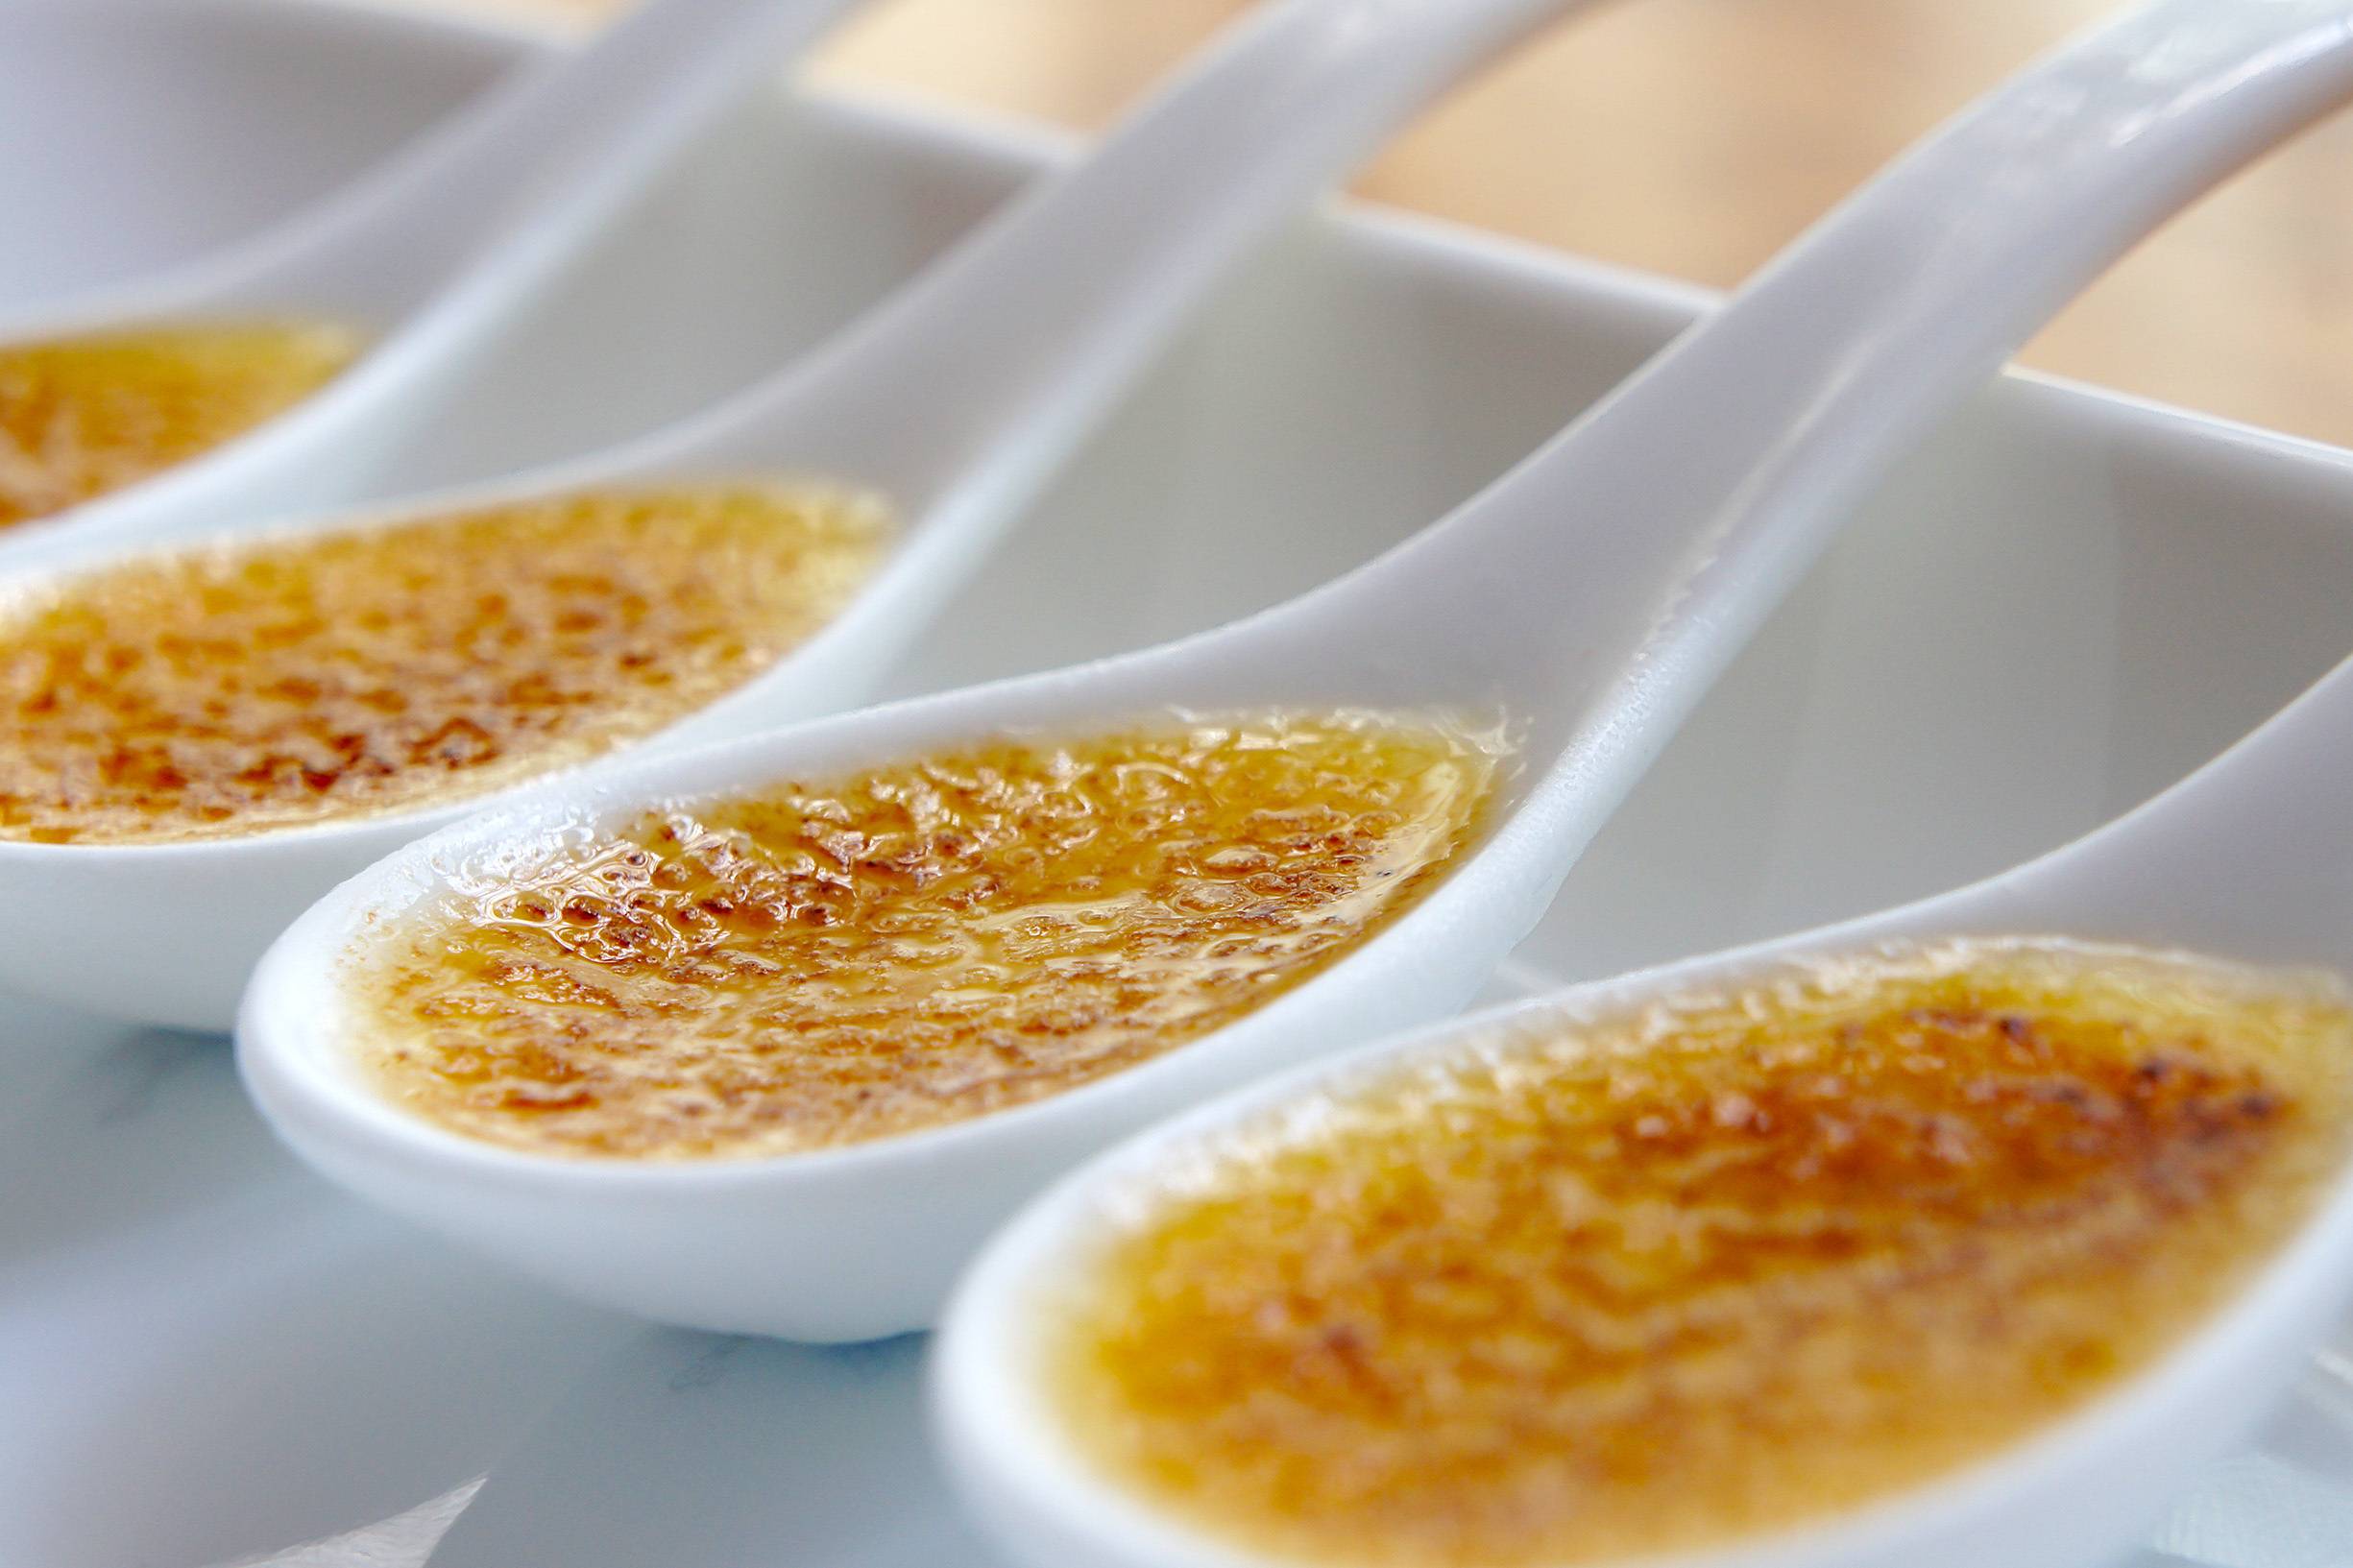 Bailey's creme brulee by Andrea Correale